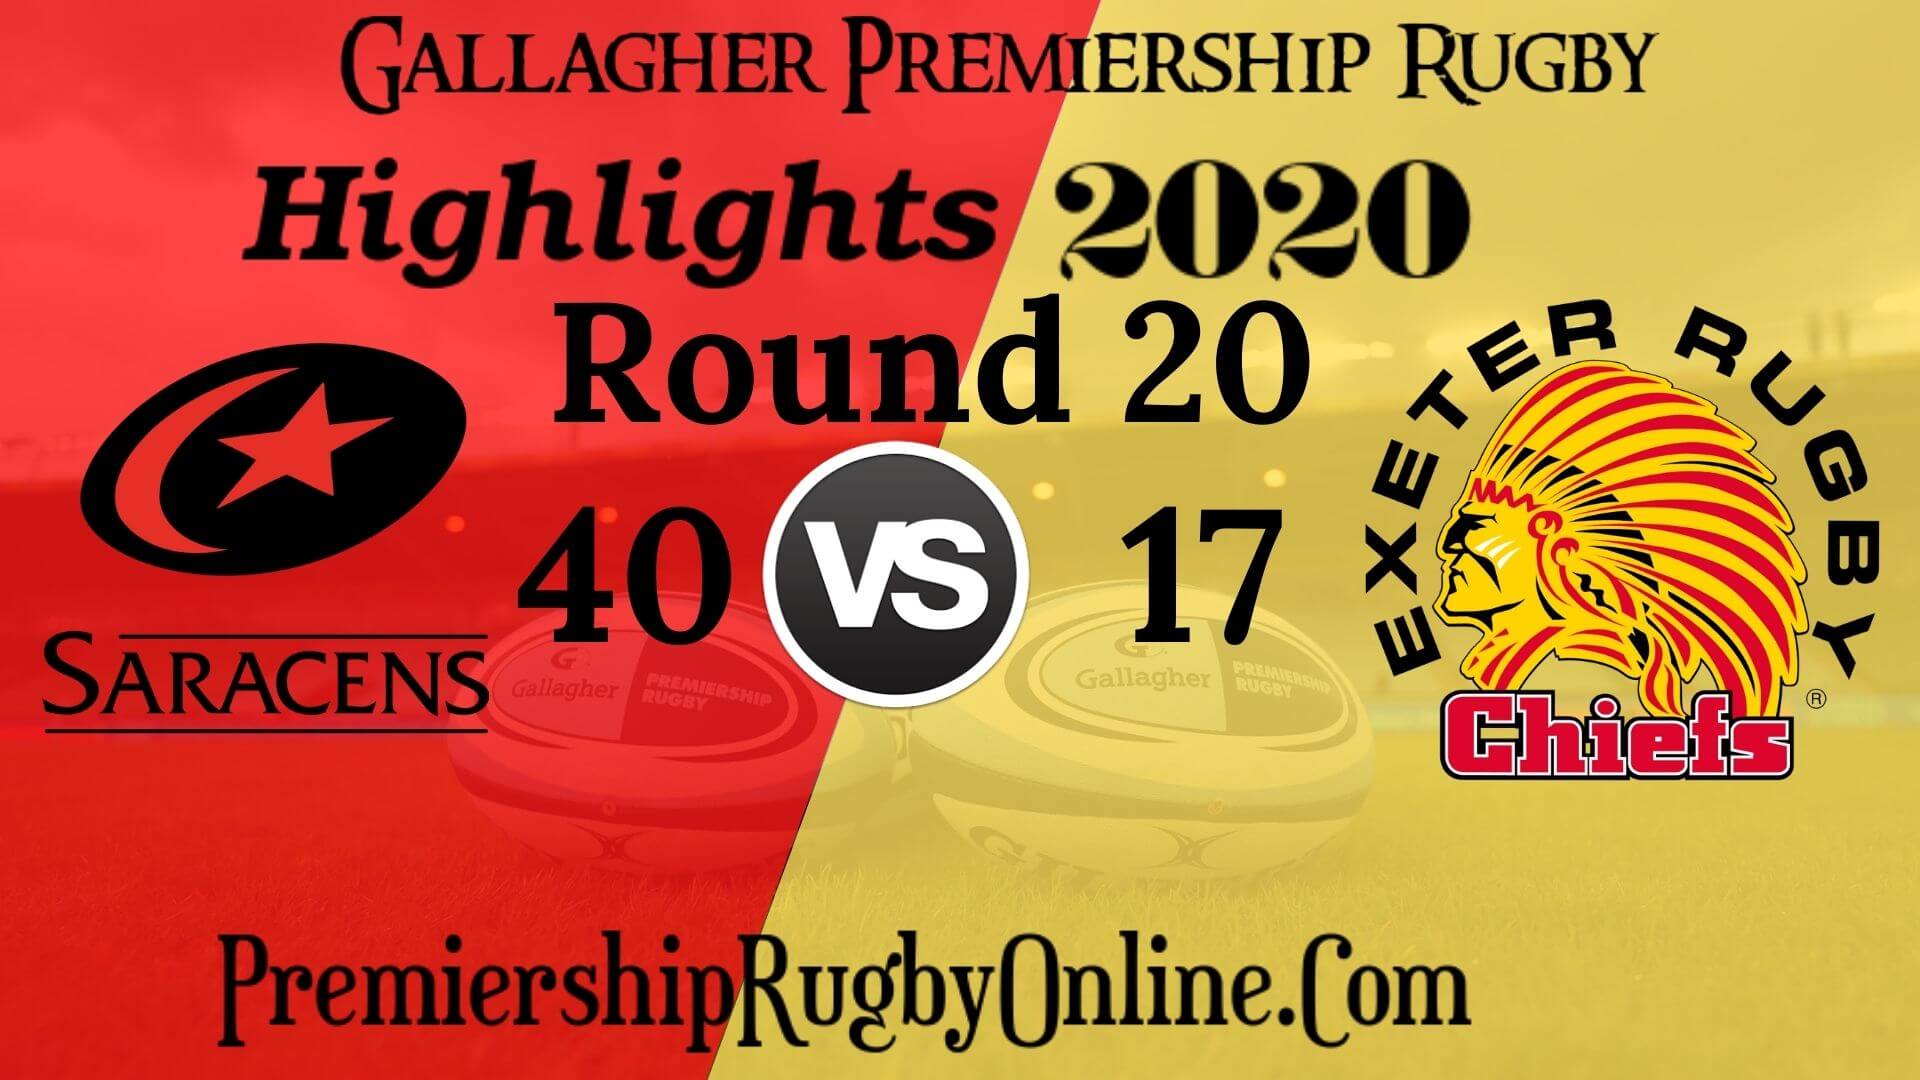 Saracens vs Exeter Chiefs Highlights 2020 RD 20